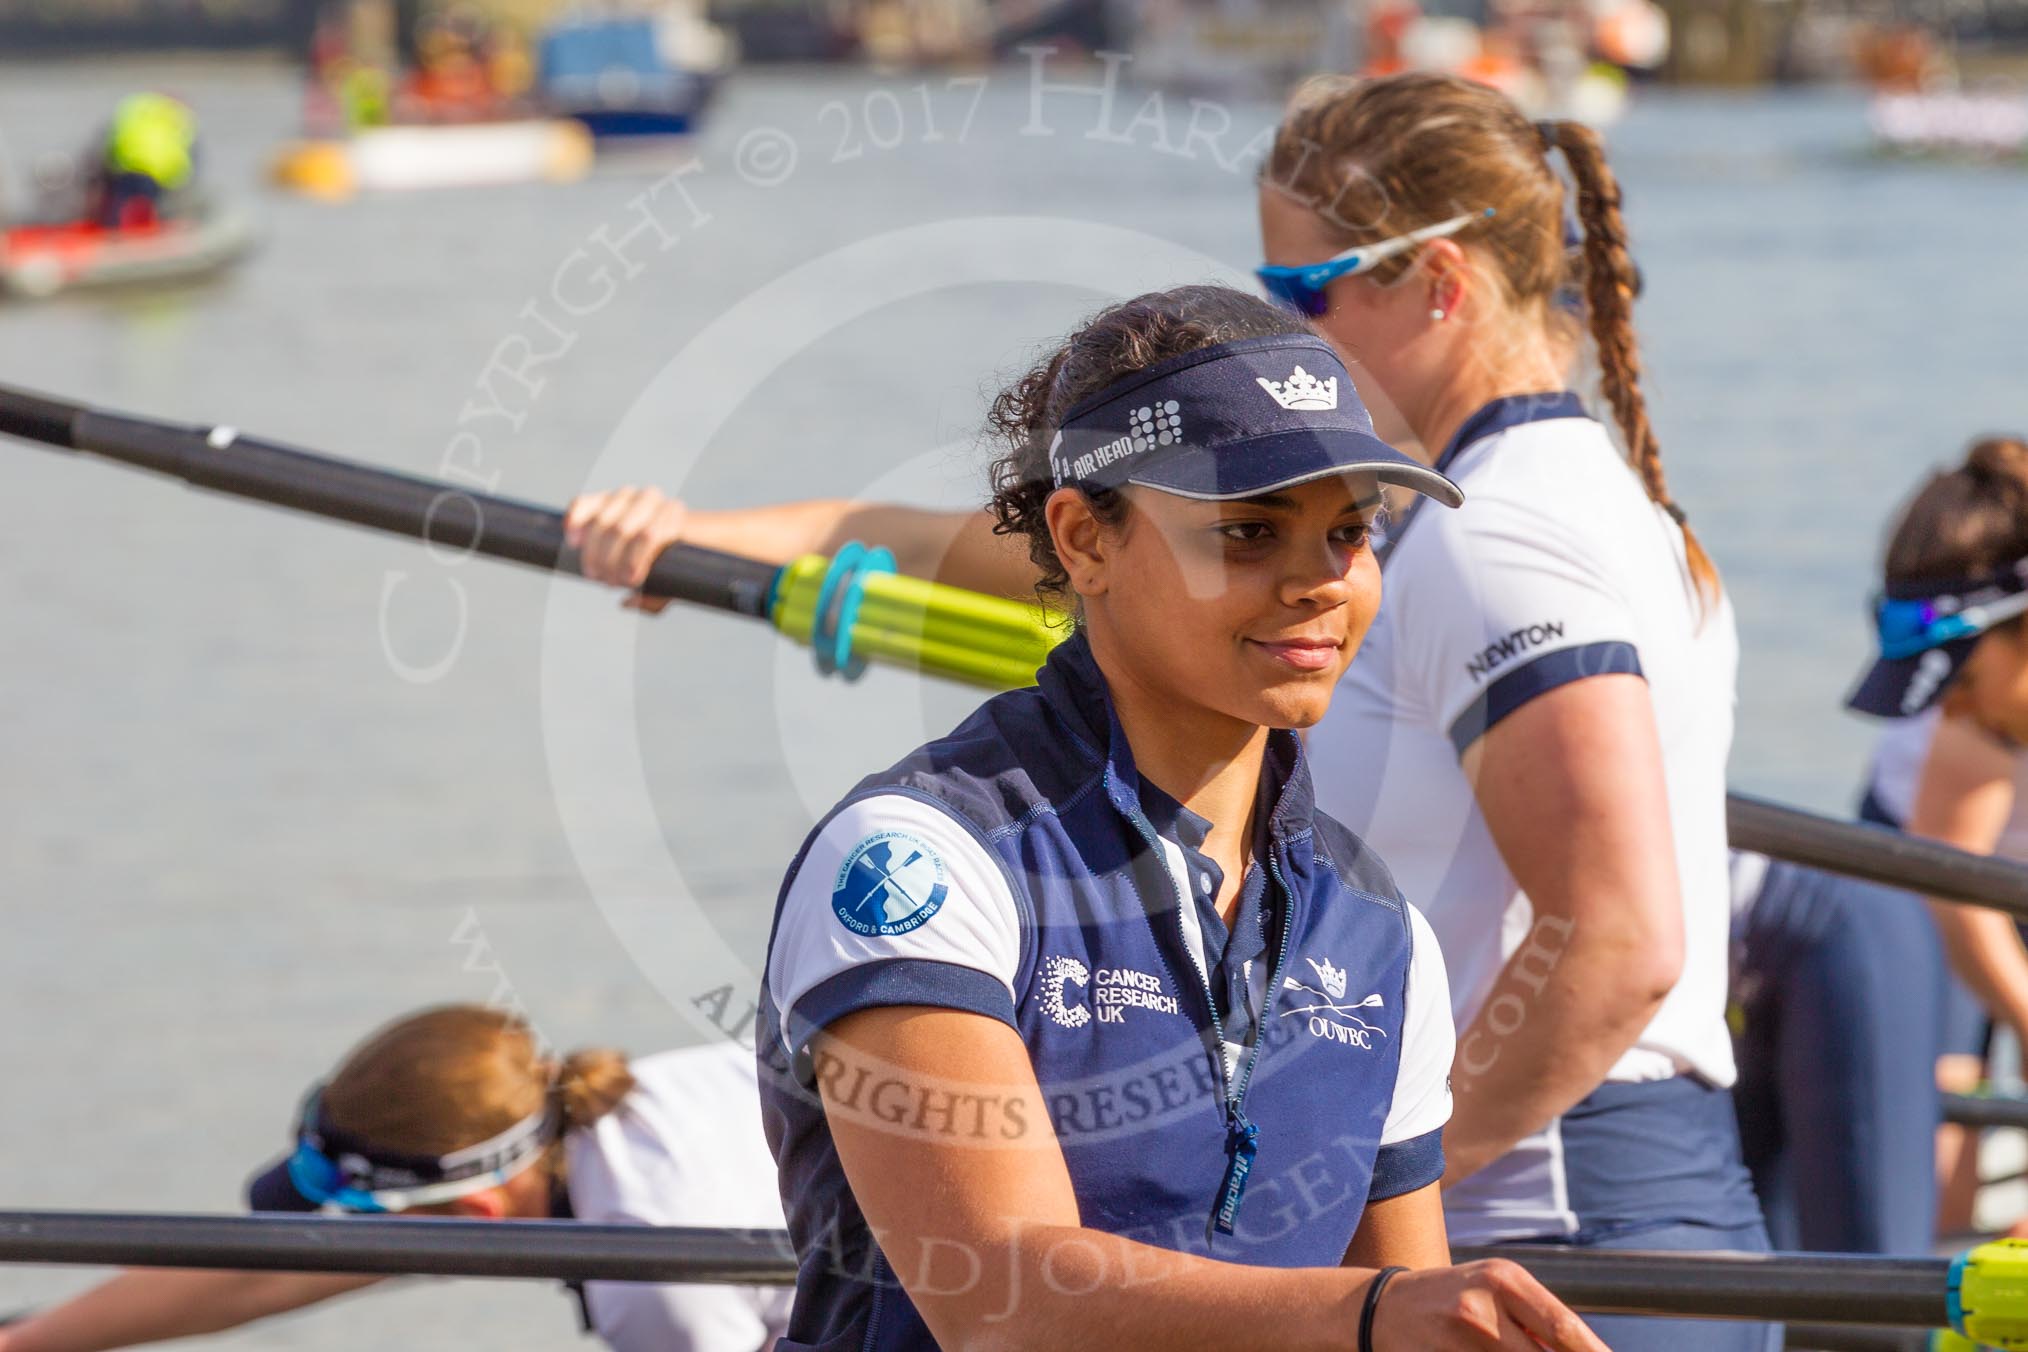 The Boat Race season 2017 -  The Cancer Research Women's Boat Race: OUWBC getting their boat ready, here 7 seat 7 Jenna Hebert.
River Thames between Putney Bridge and Mortlake,
London SW15,

United Kingdom,
on 02 April 2017 at 15:51, image #83